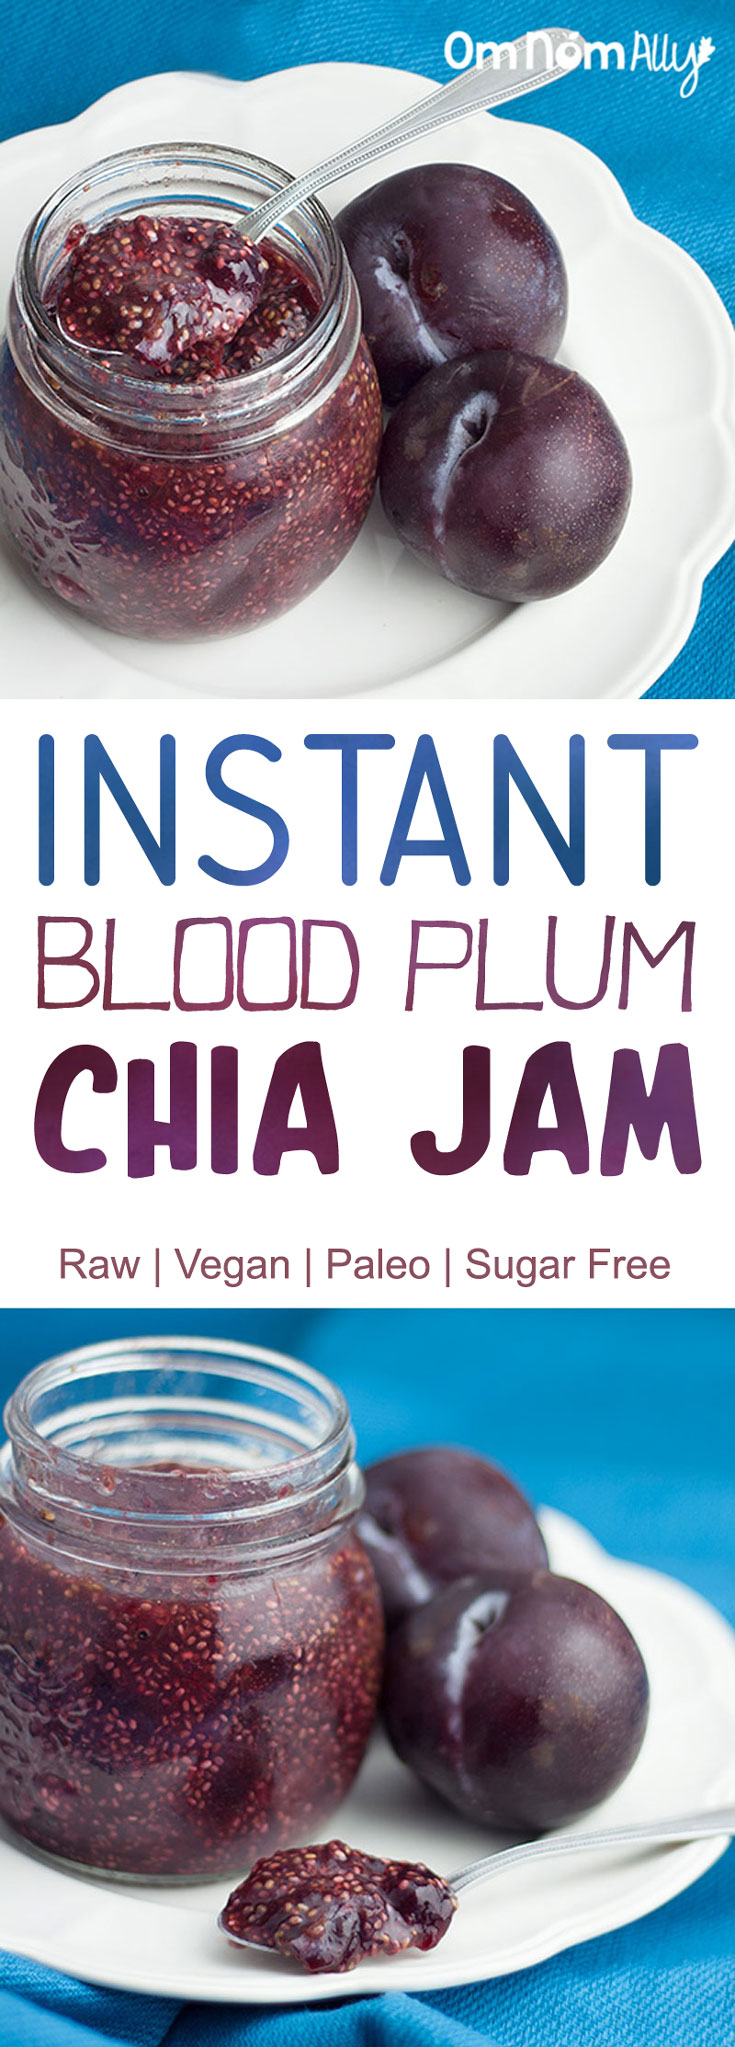 This Raw, Vegan, Paleo and Sugar Free condiment is the easiest jam you'll ever make - because chia seeds are magic!